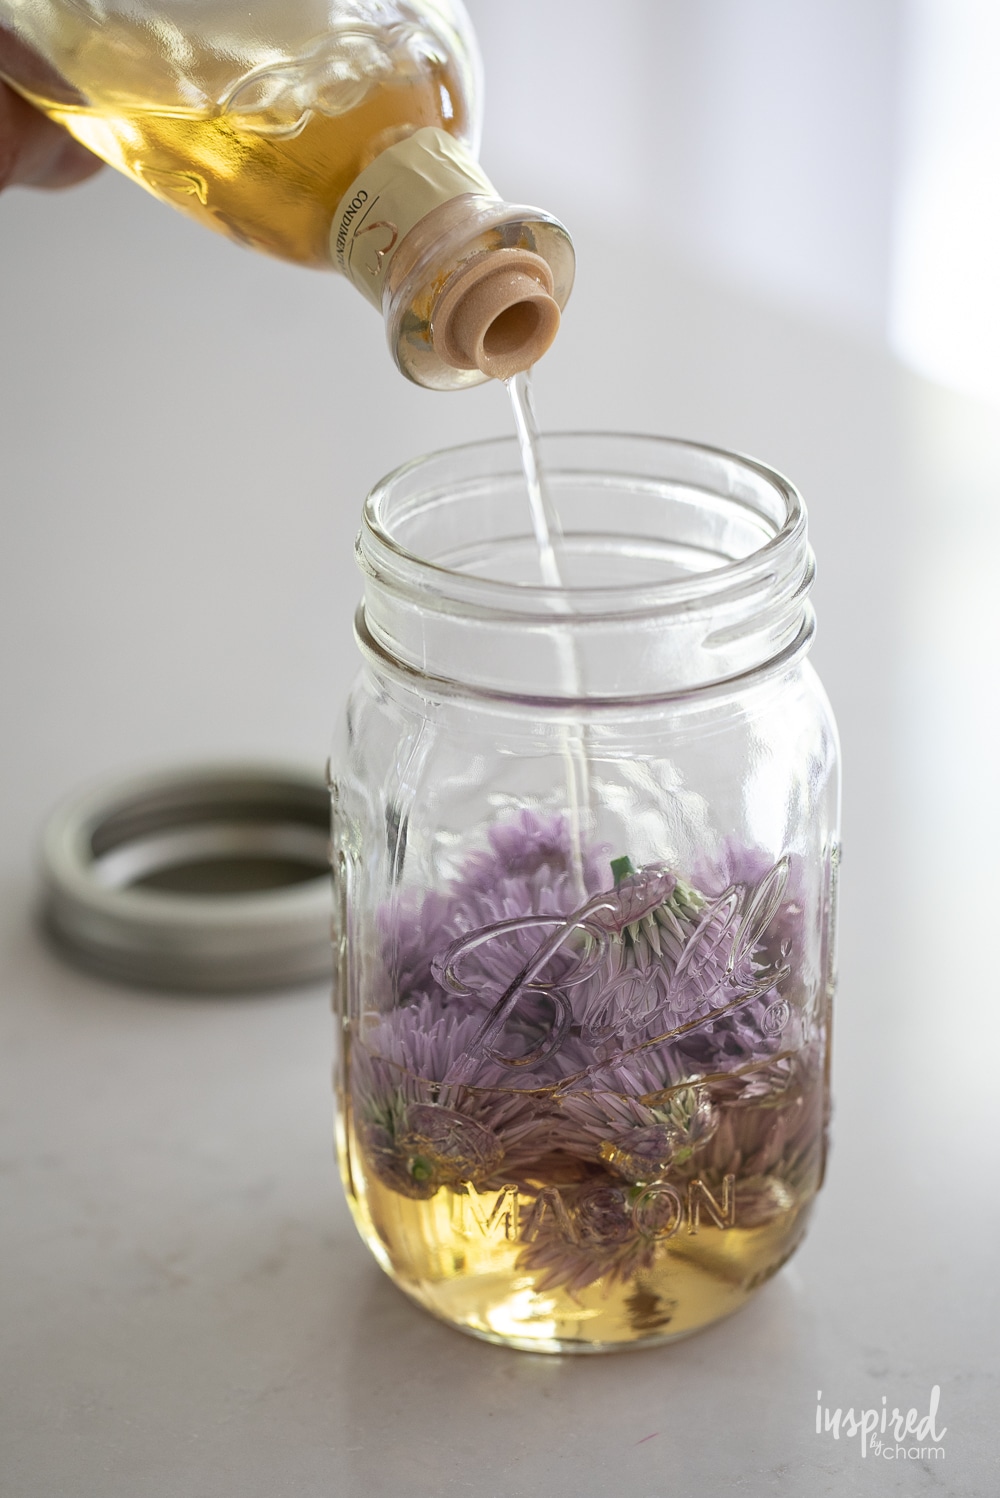 pouring white balsamic vinegar into jar with chive blossoms.